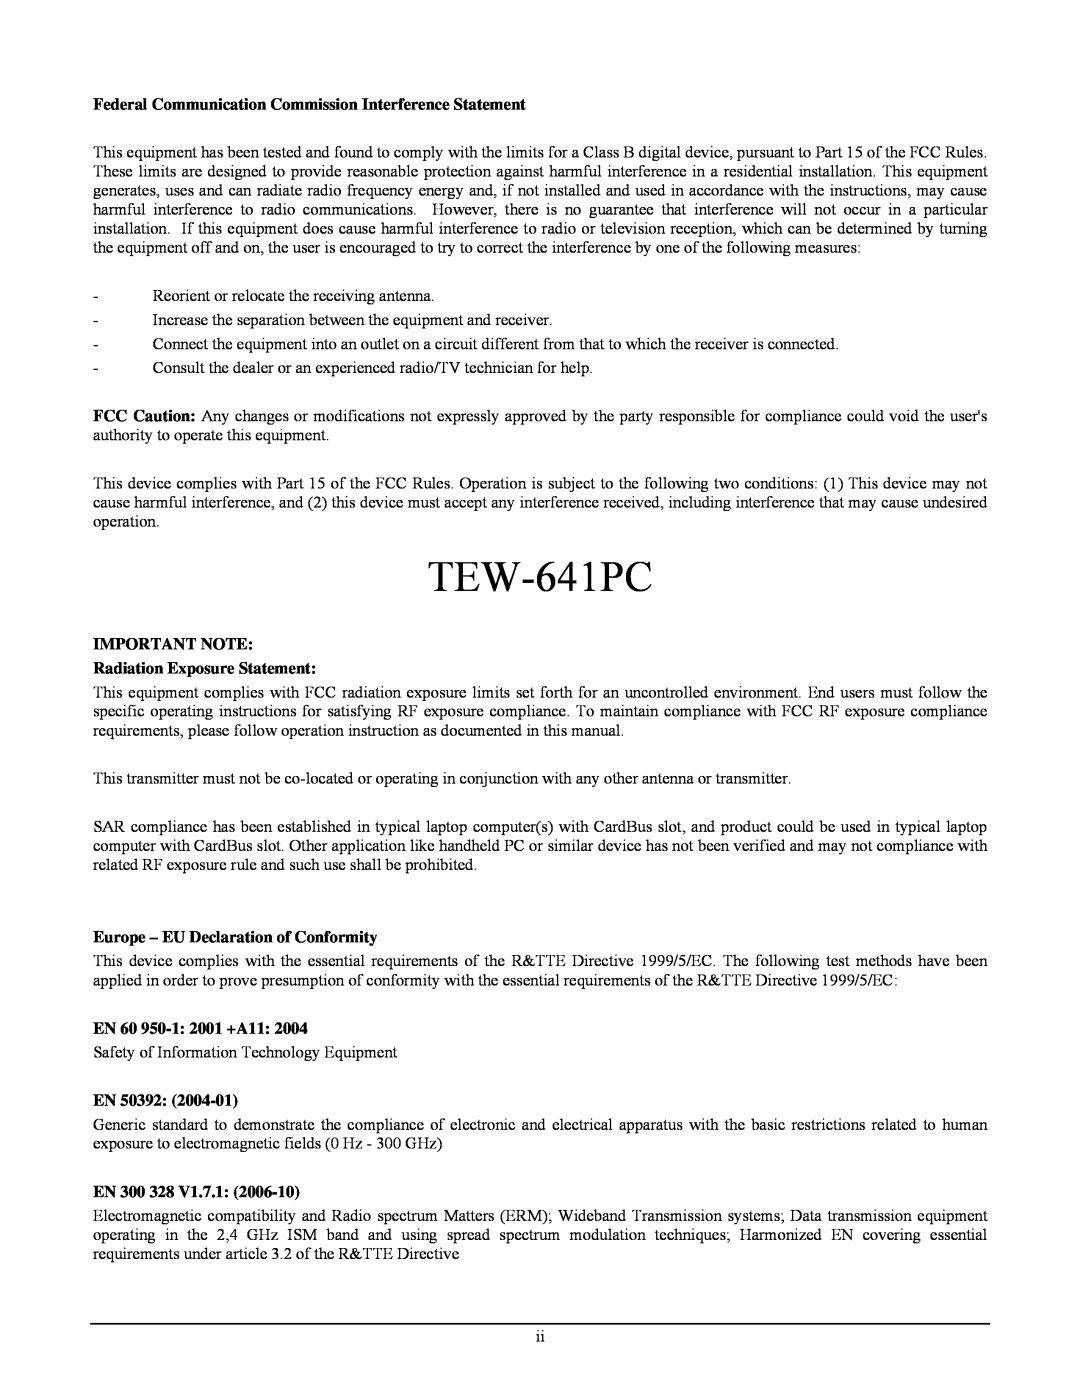 TRENDnet TEW-641PC Federal Communication Commission Interference Statement, IMPORTANT NOTE Radiation Exposure Statement 